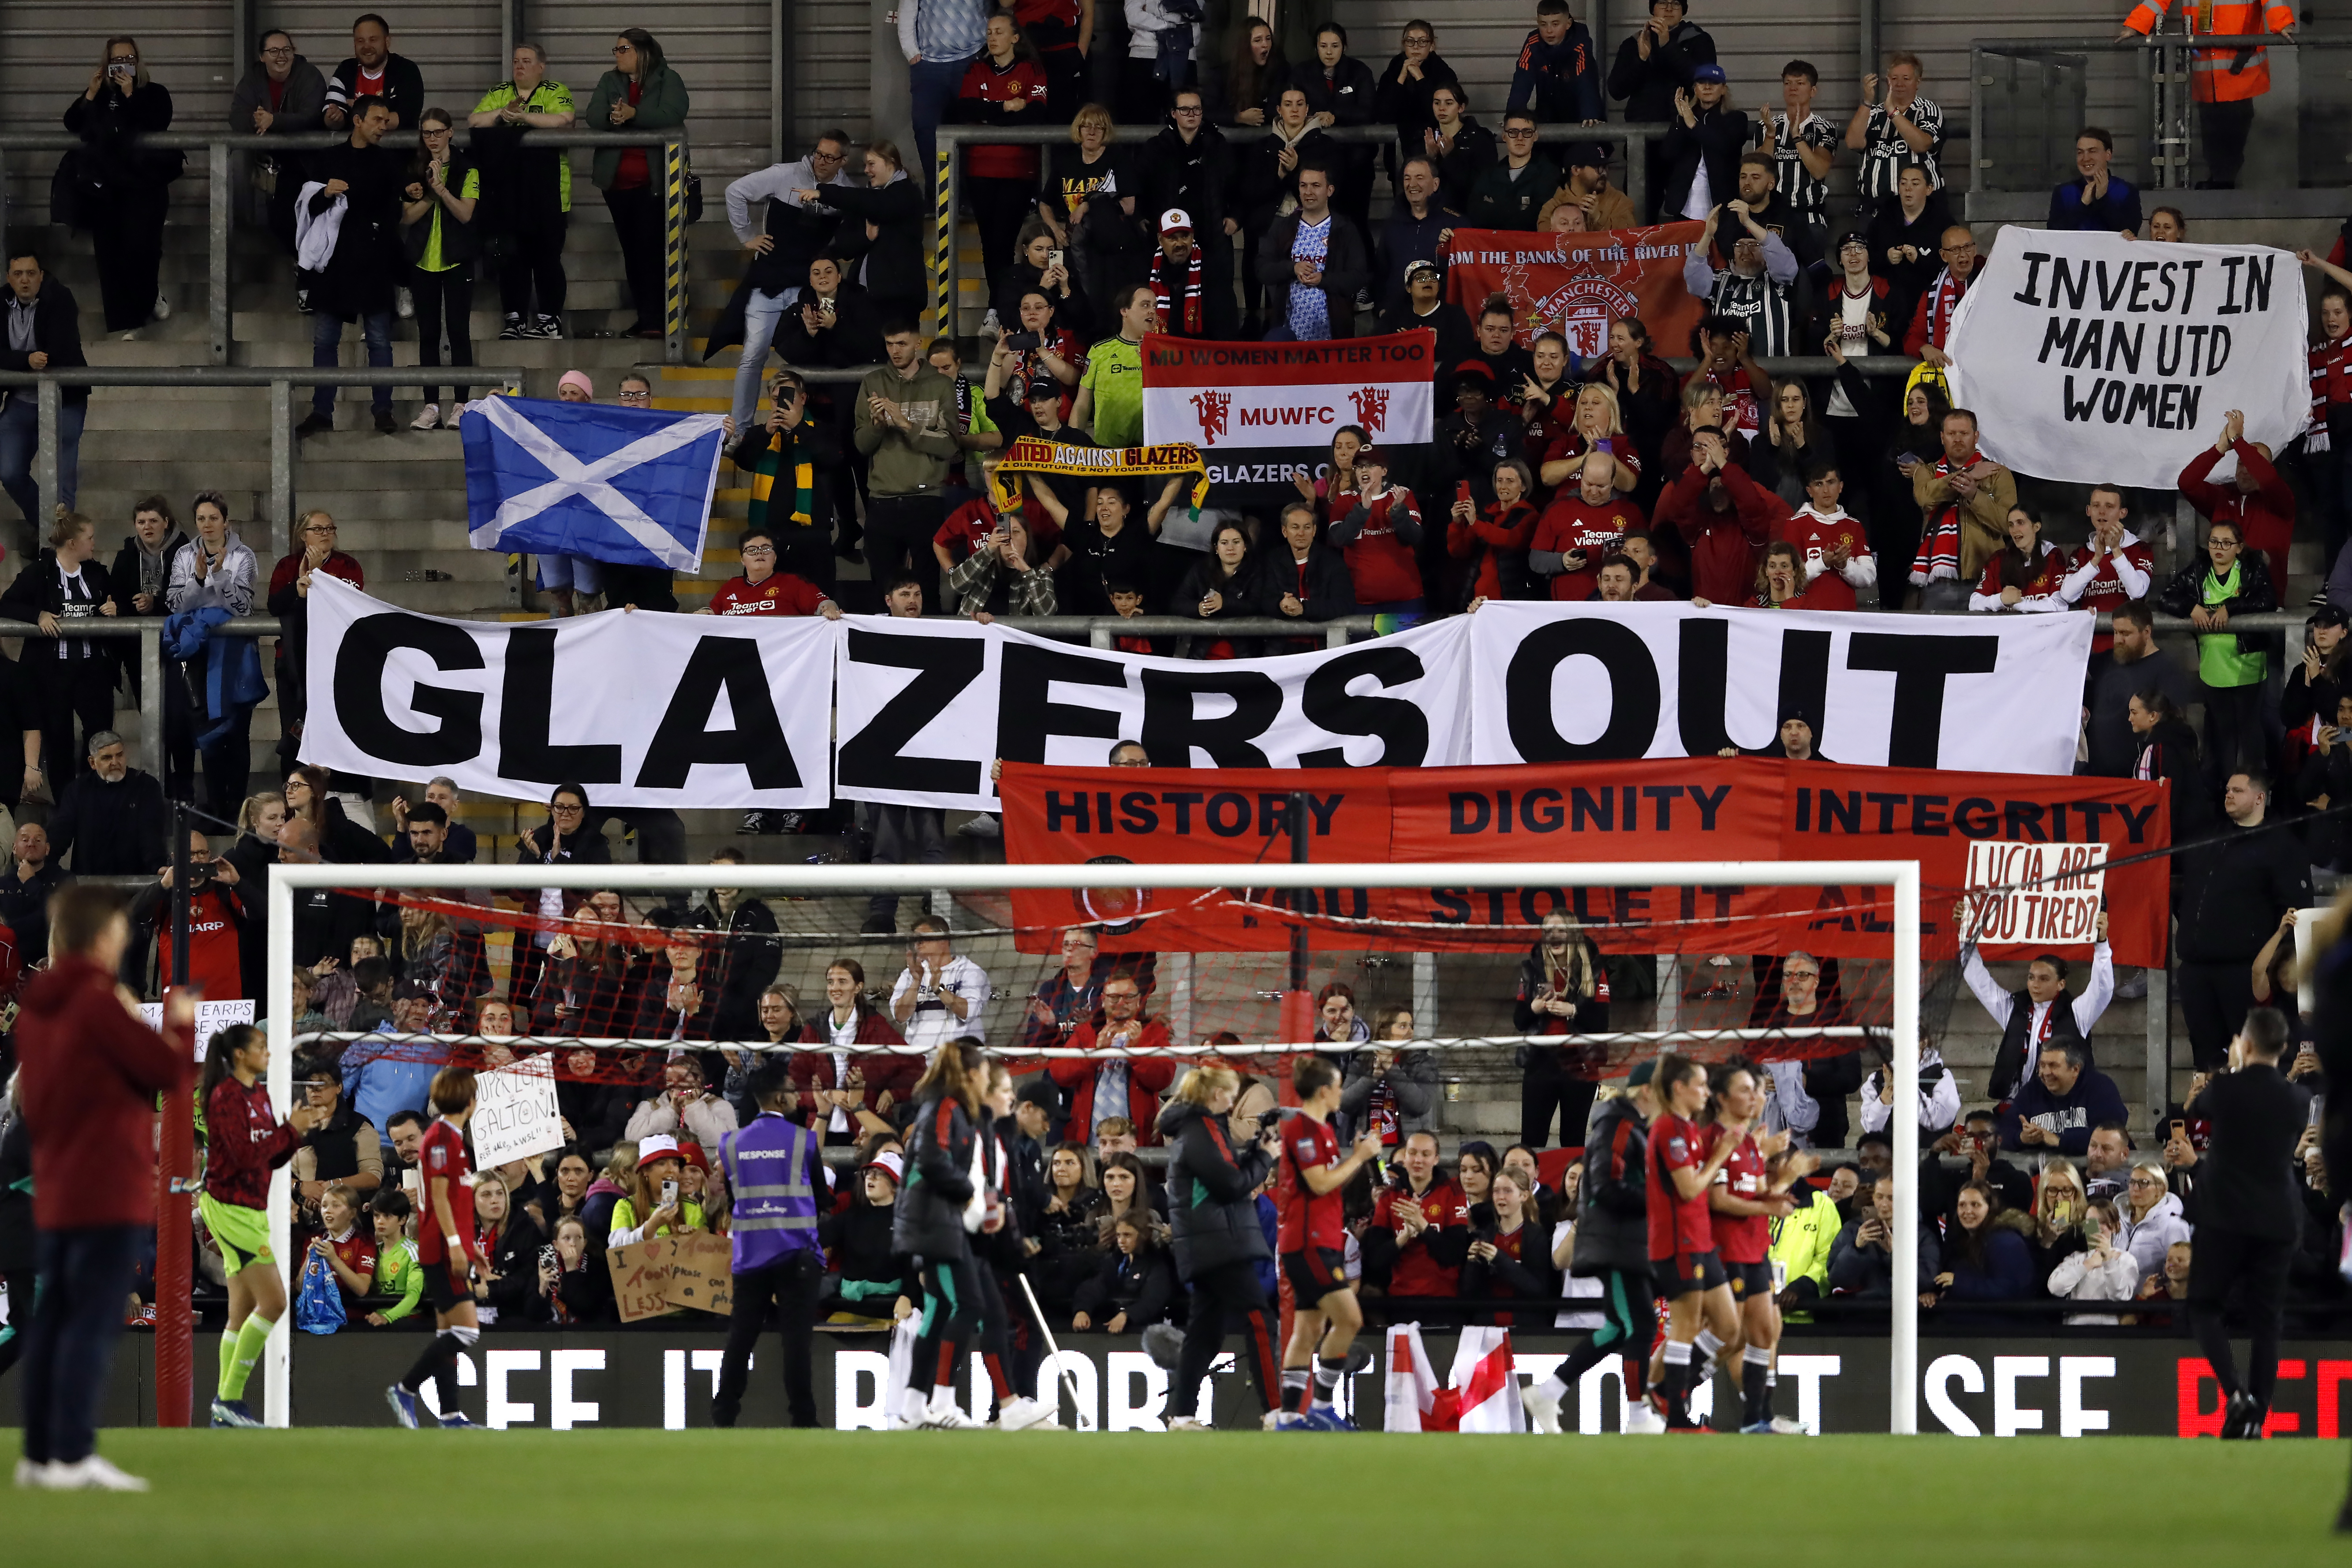 Manchester United fans have been against the Glazer family for some time